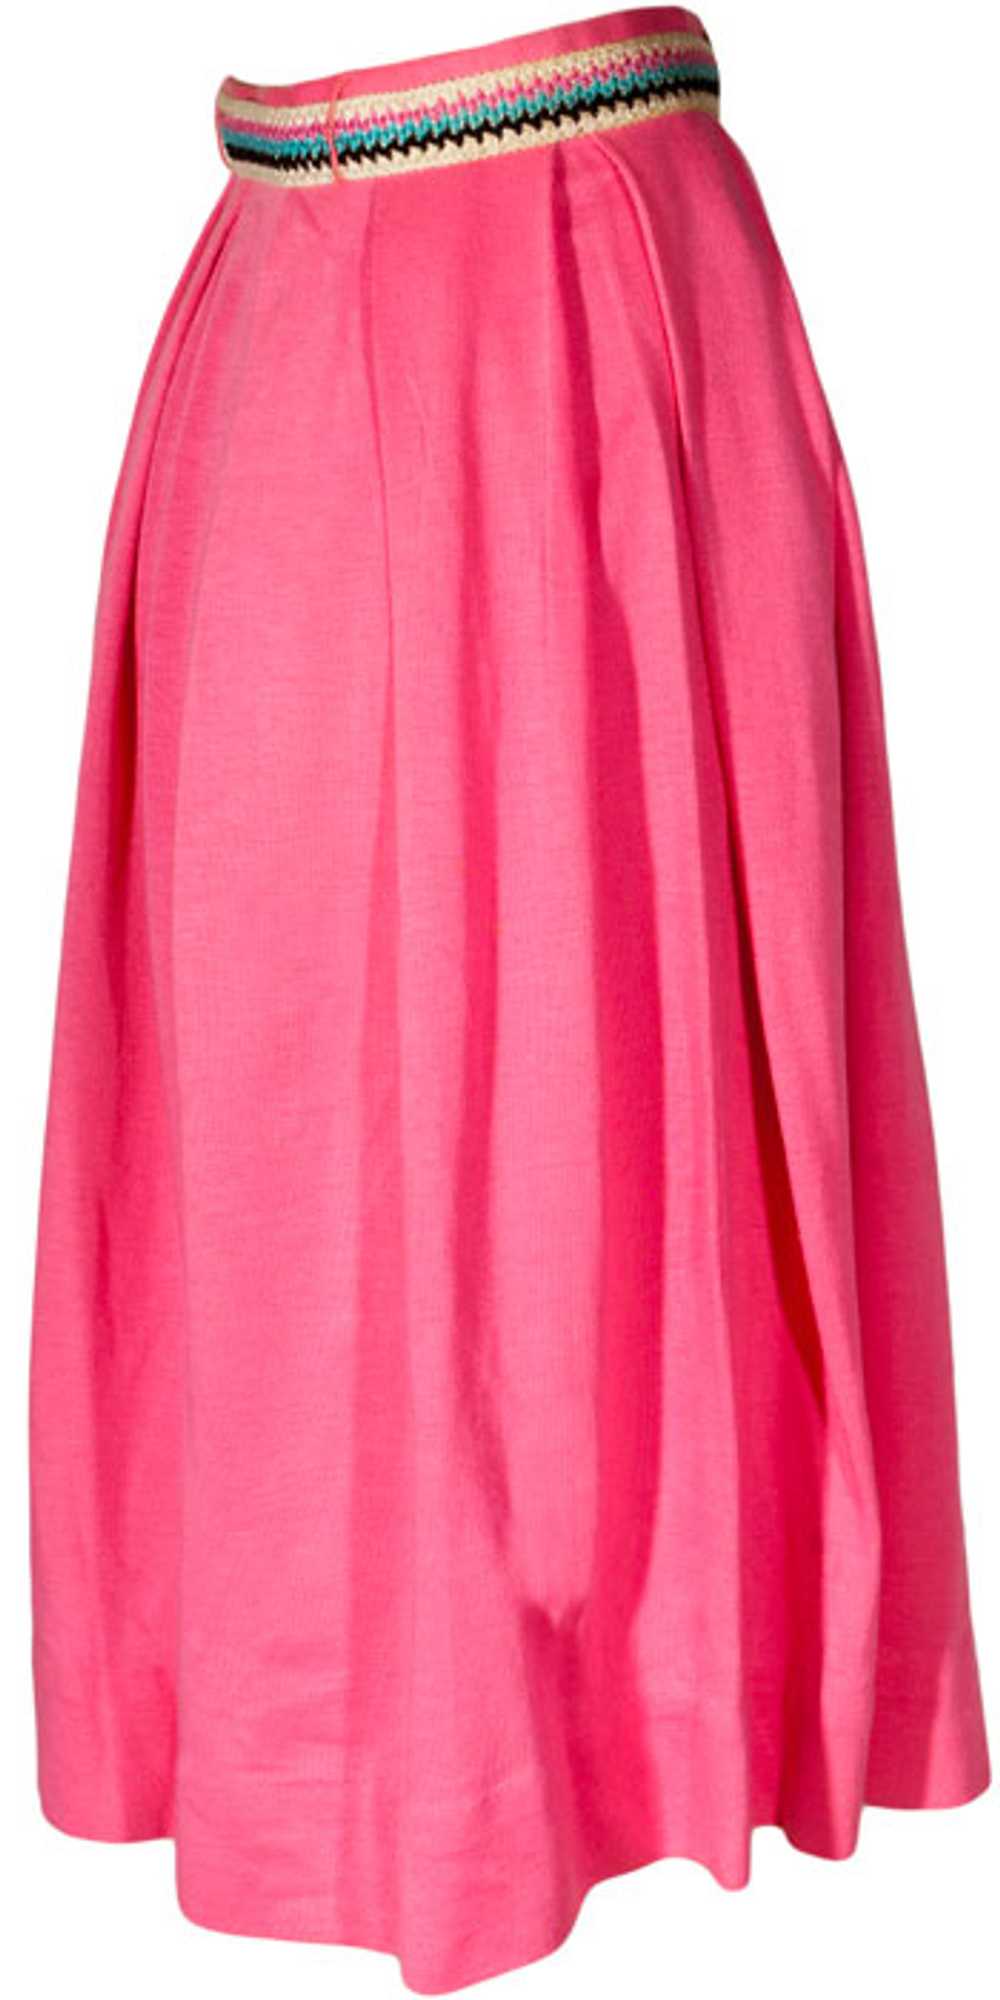 1960s Jersey Flared Skirt - image 3